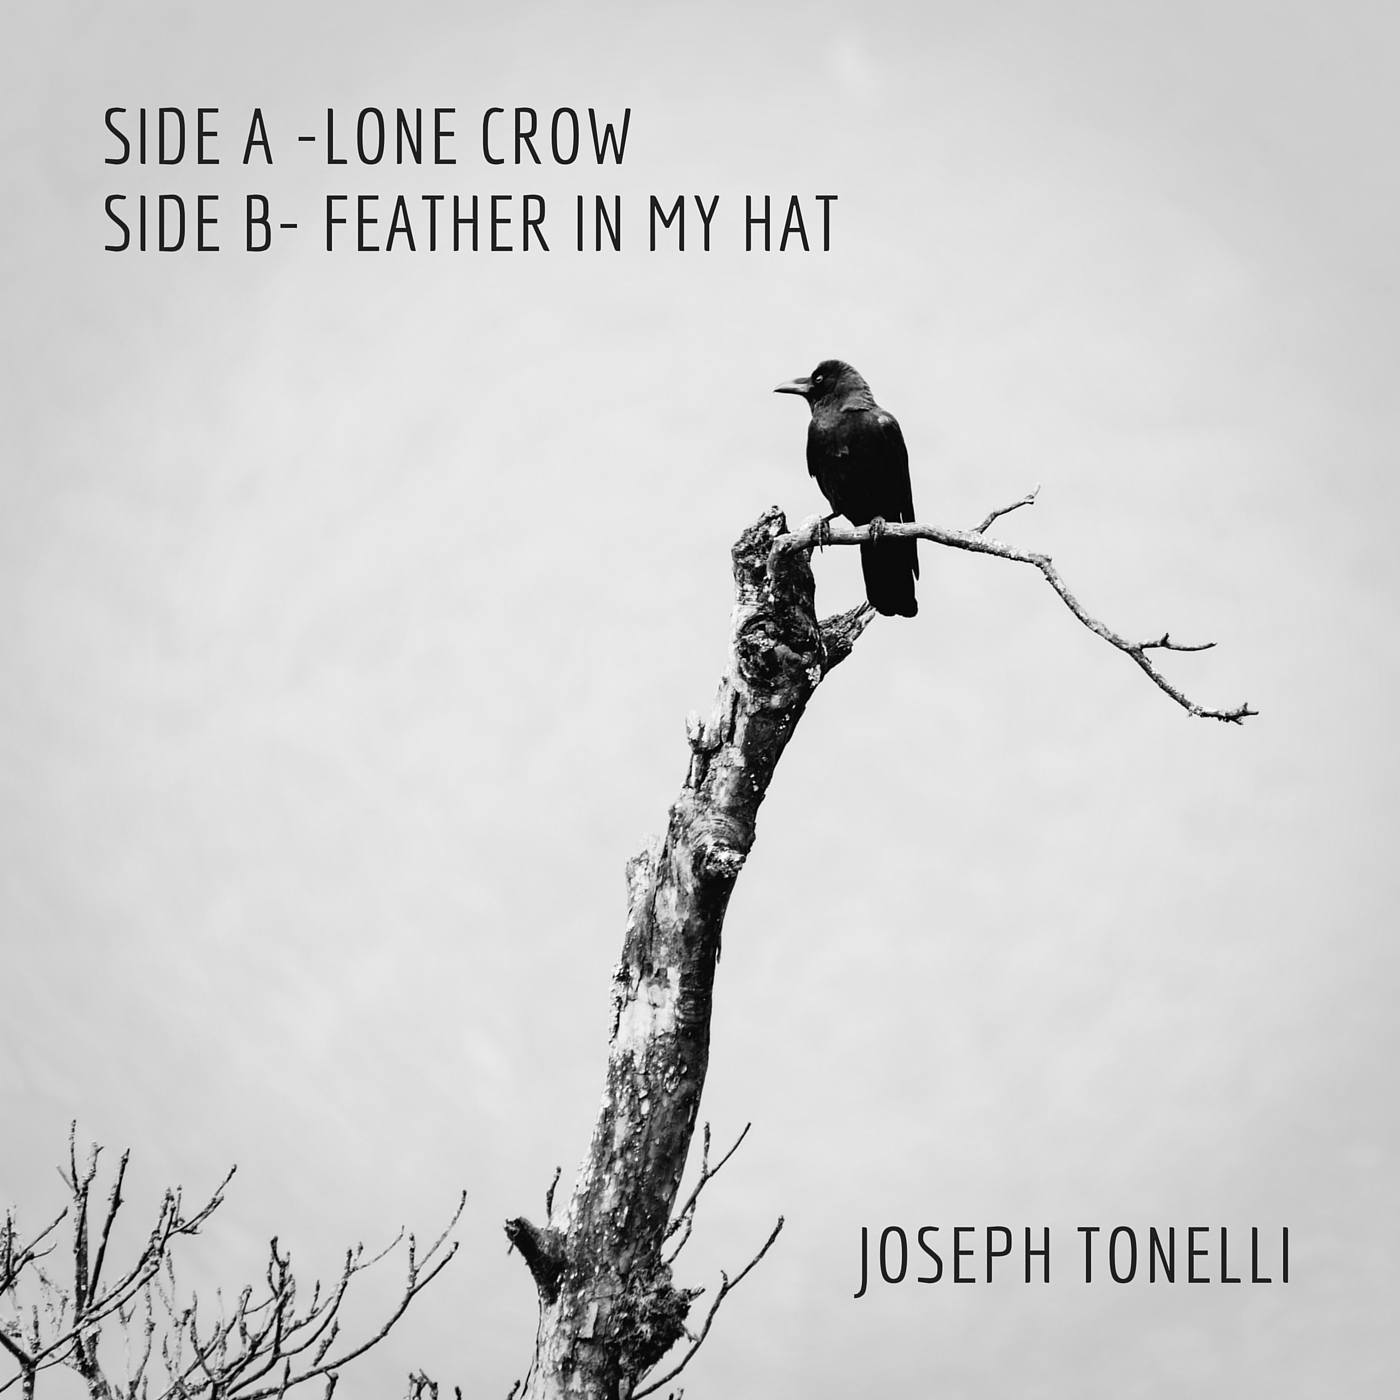  Joseph Tonelli – “Lone Crow”/”Feather In My Hat”